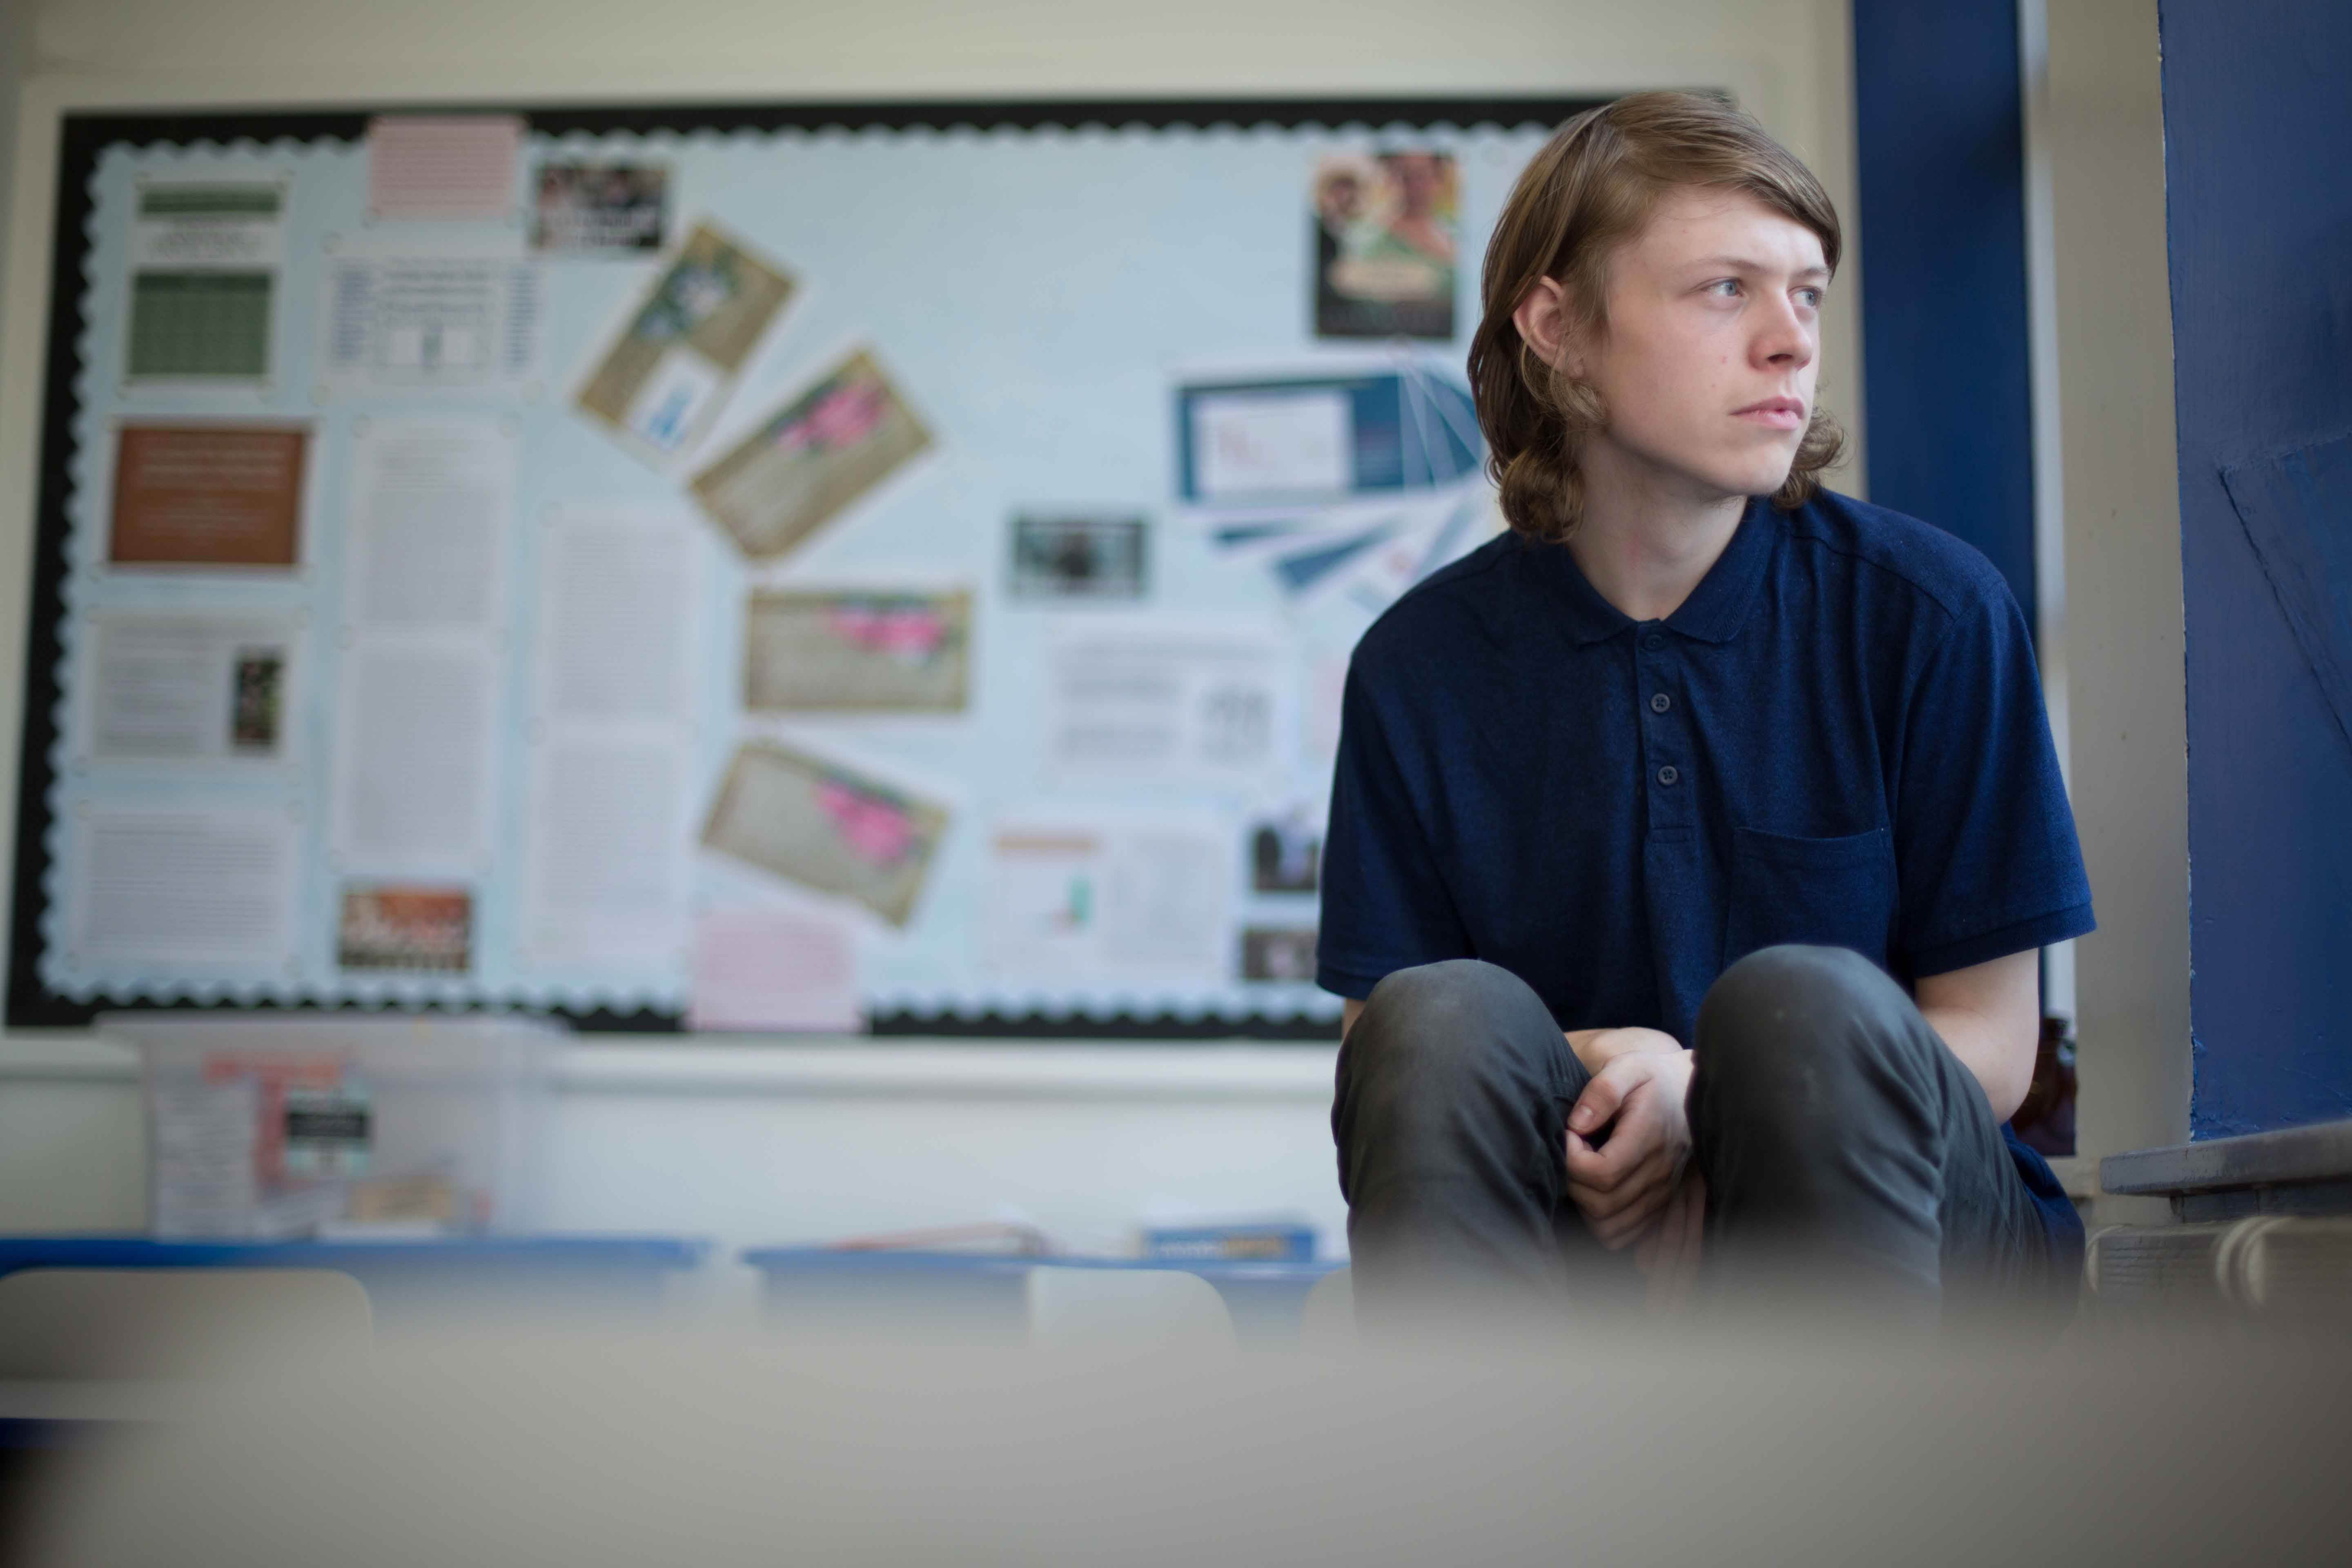 Young person looking out of classroom window